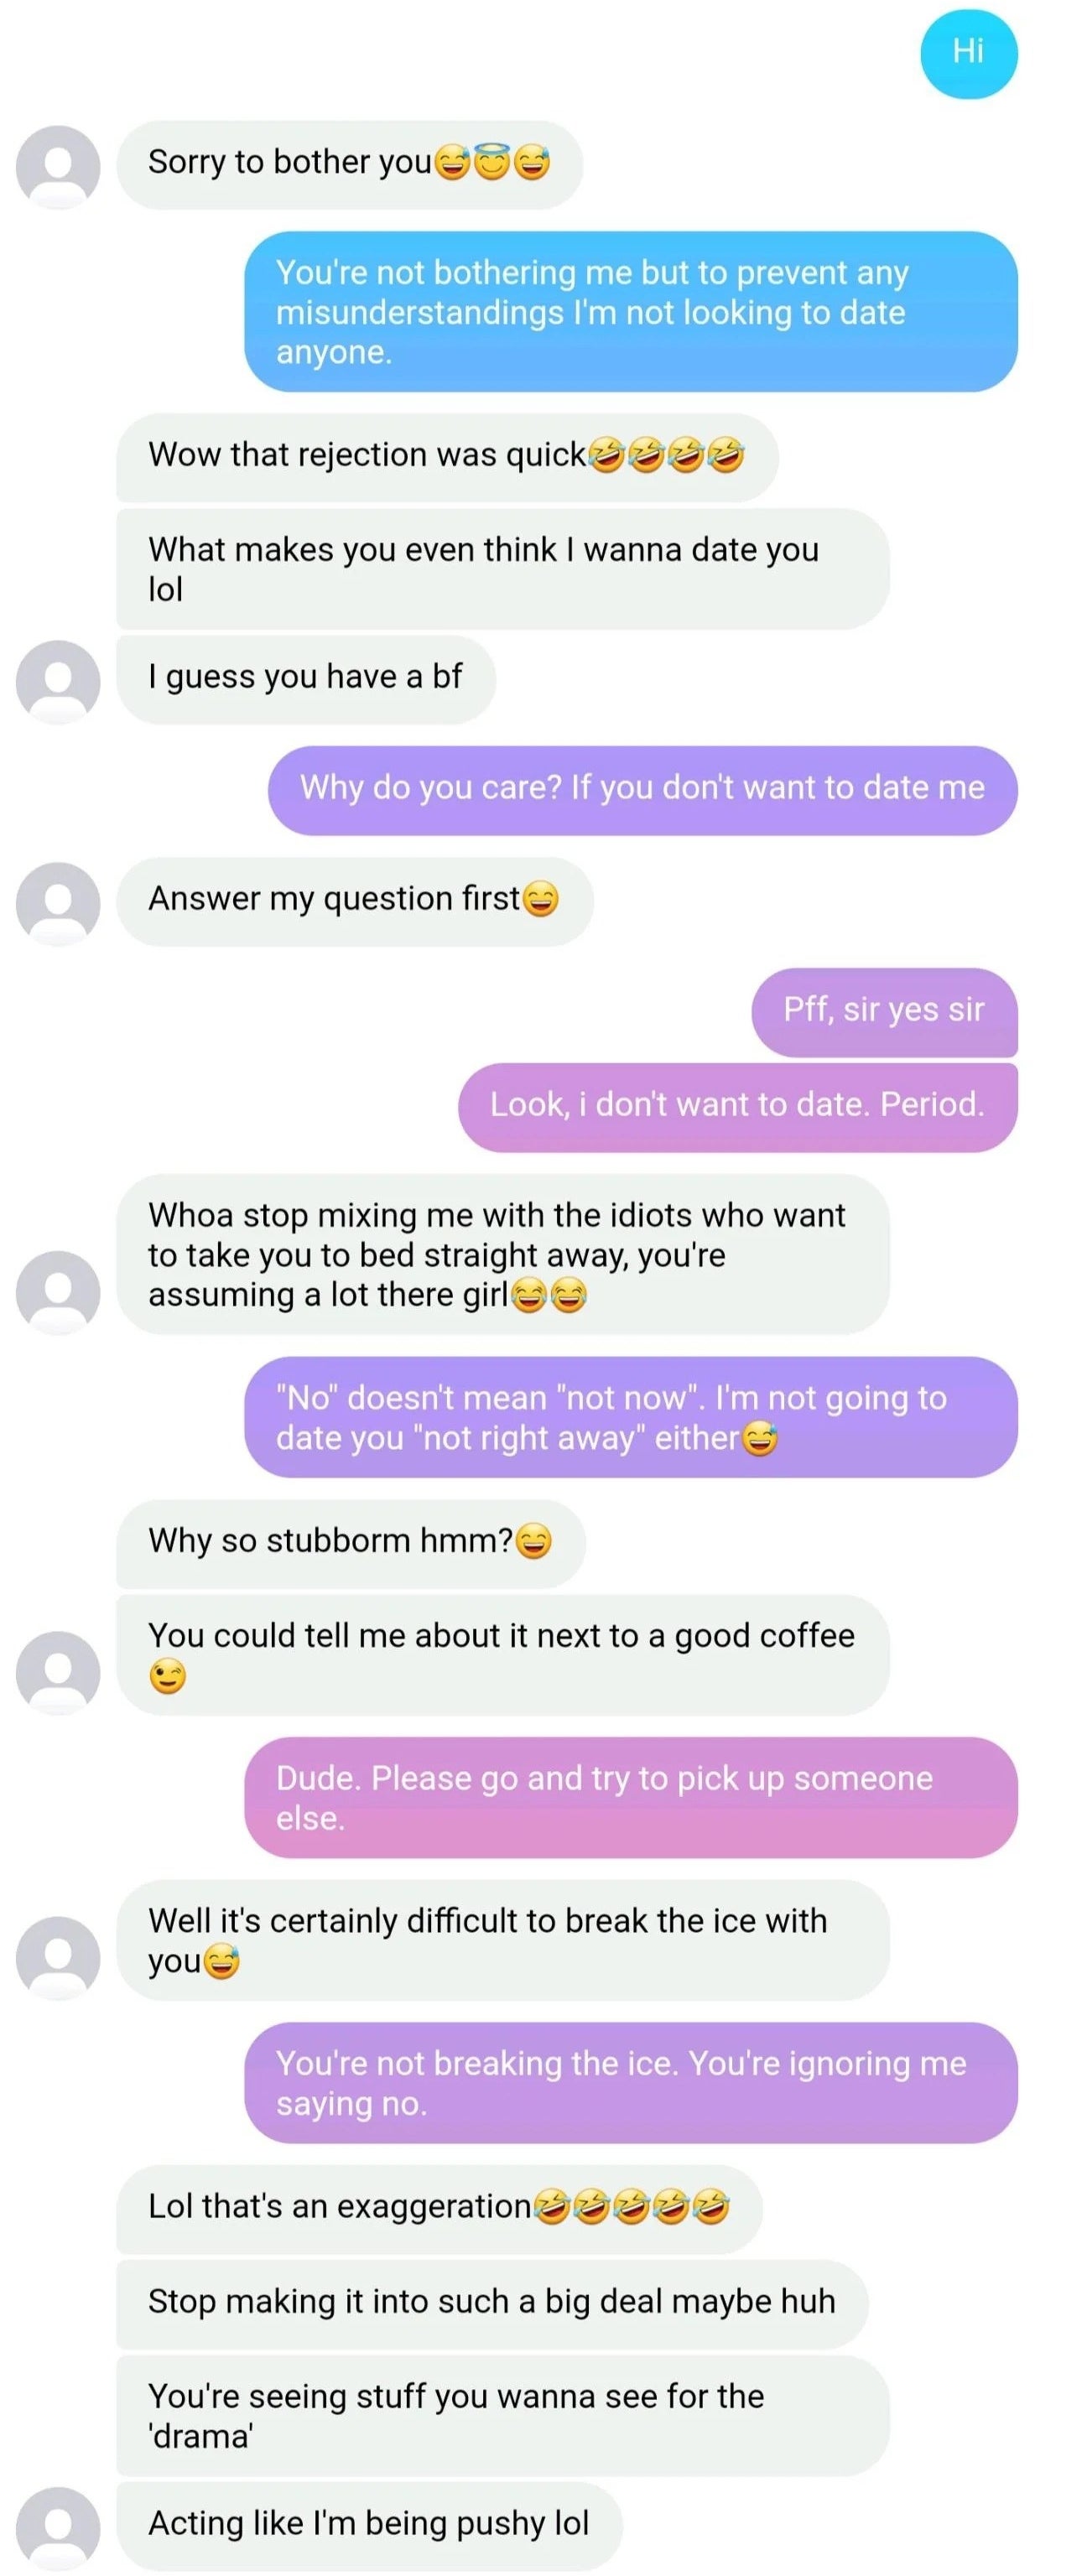 He says she&#x27;s being presumptuous about thinking he&#x27;s asking her out, then he keeps asking her intrusive, persistent questions after she says she&#x27;s not looking to date